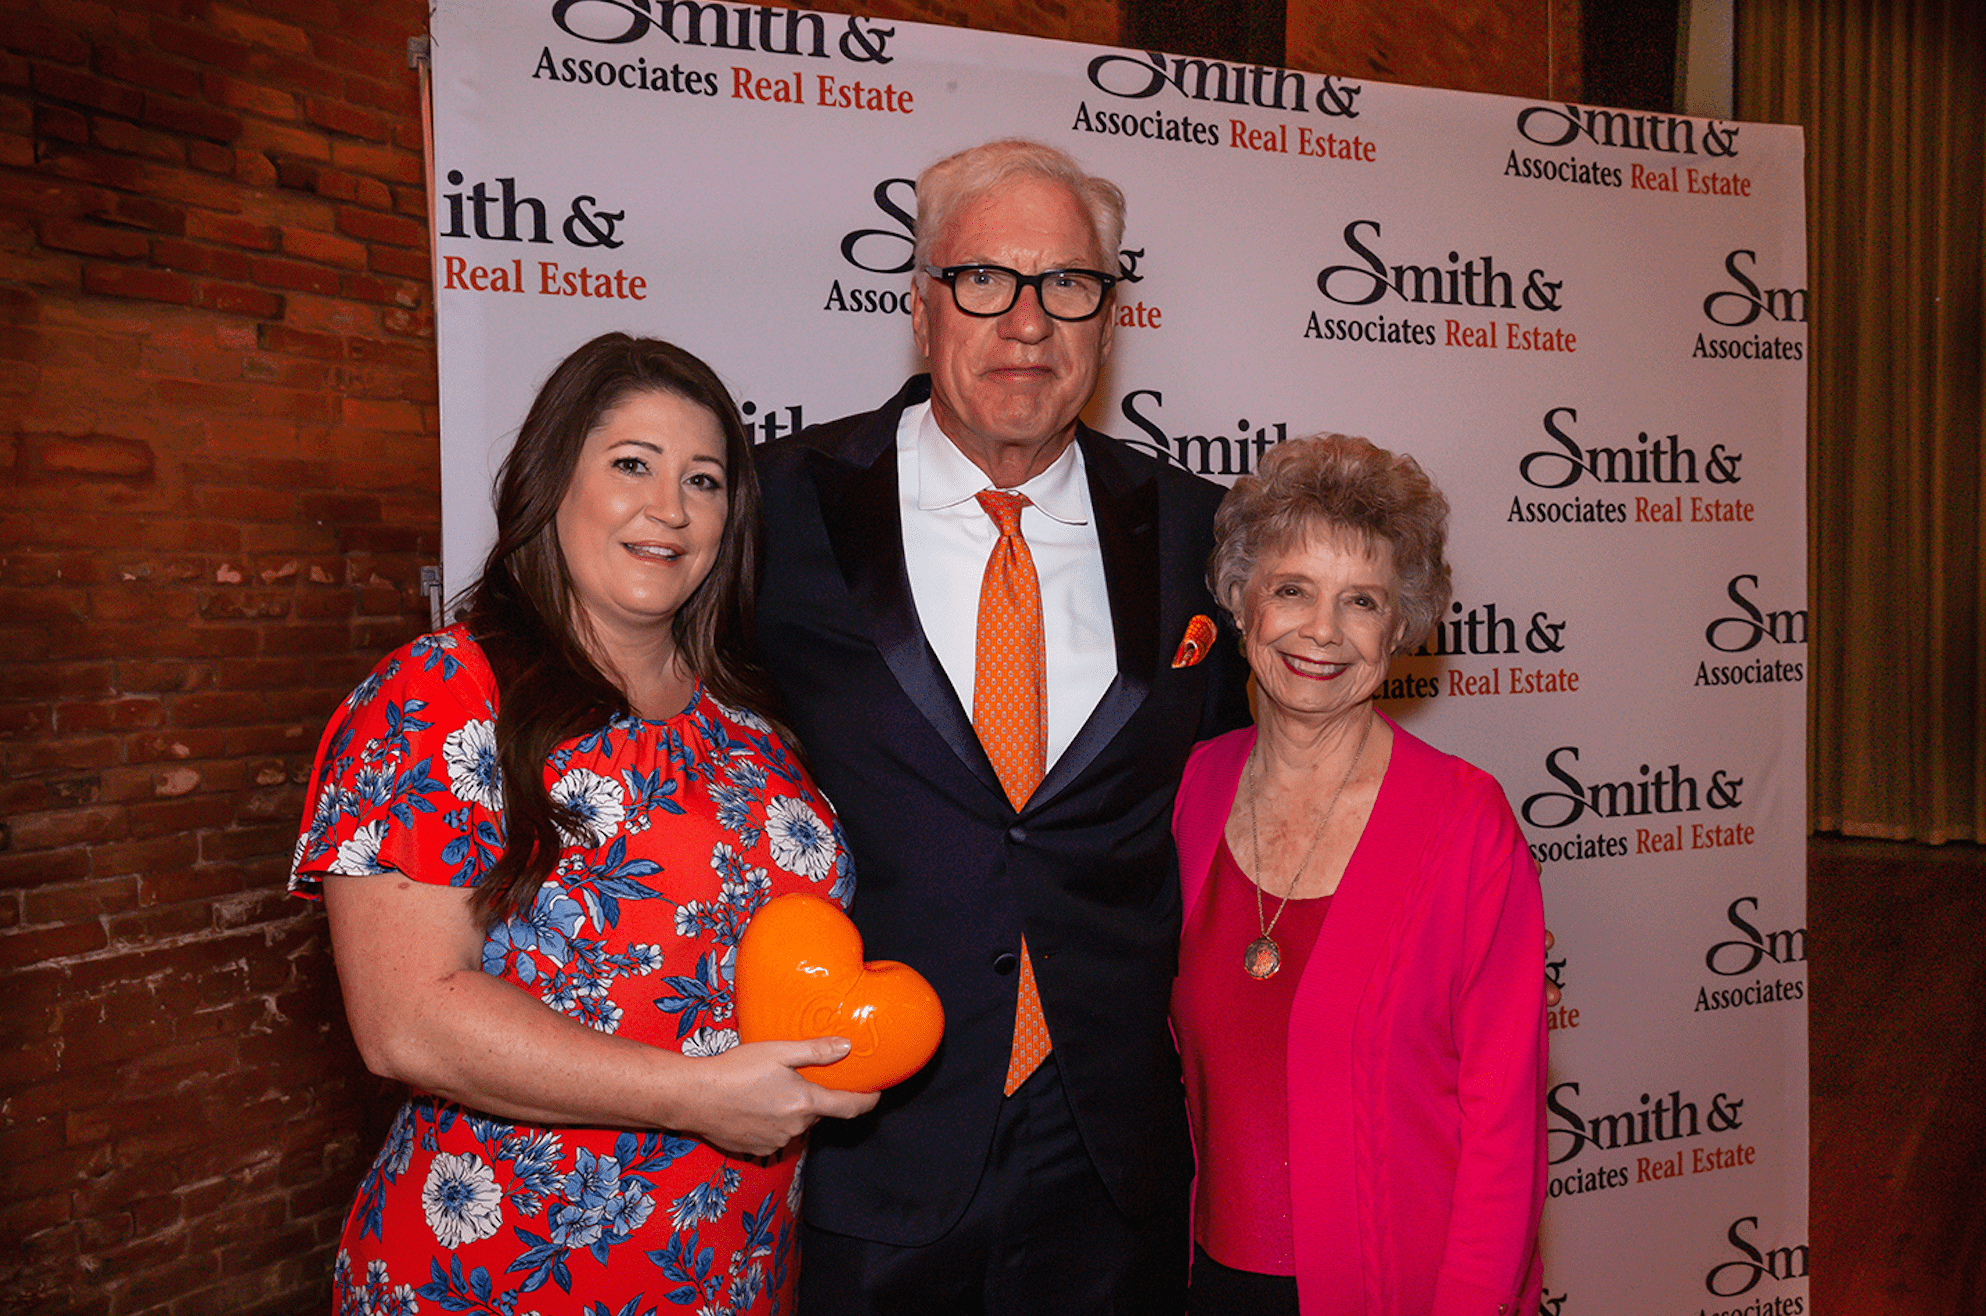 Becky Slocum (Award Recipient), Bob Glaser (President and CEO), and Mary Smith Conover (Founder) at Kickoff Celebration at Armature Works